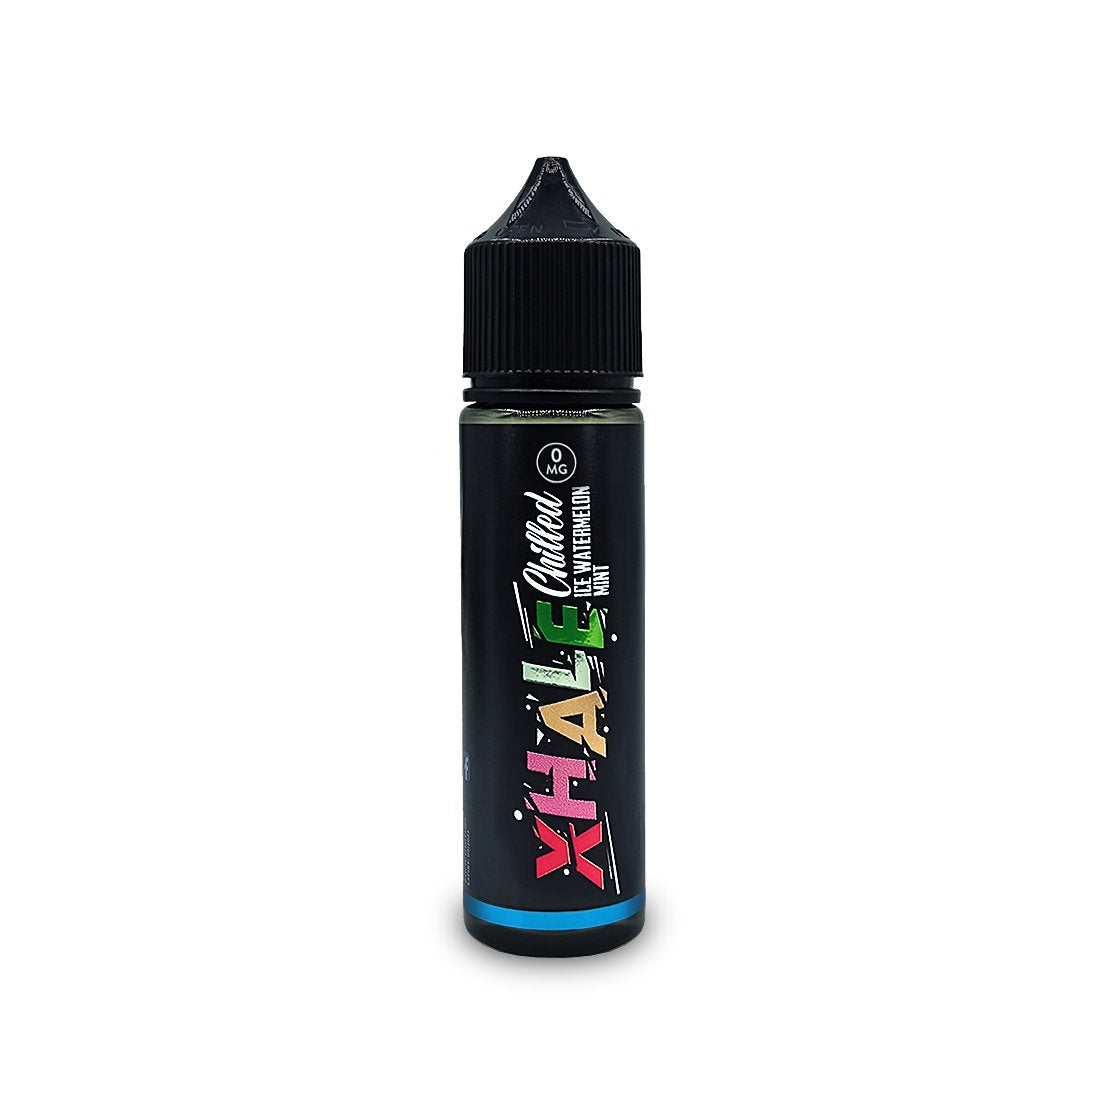 Chilled Watermelon Mint Ice 50ml Shortfill E Liquid BY XHALE